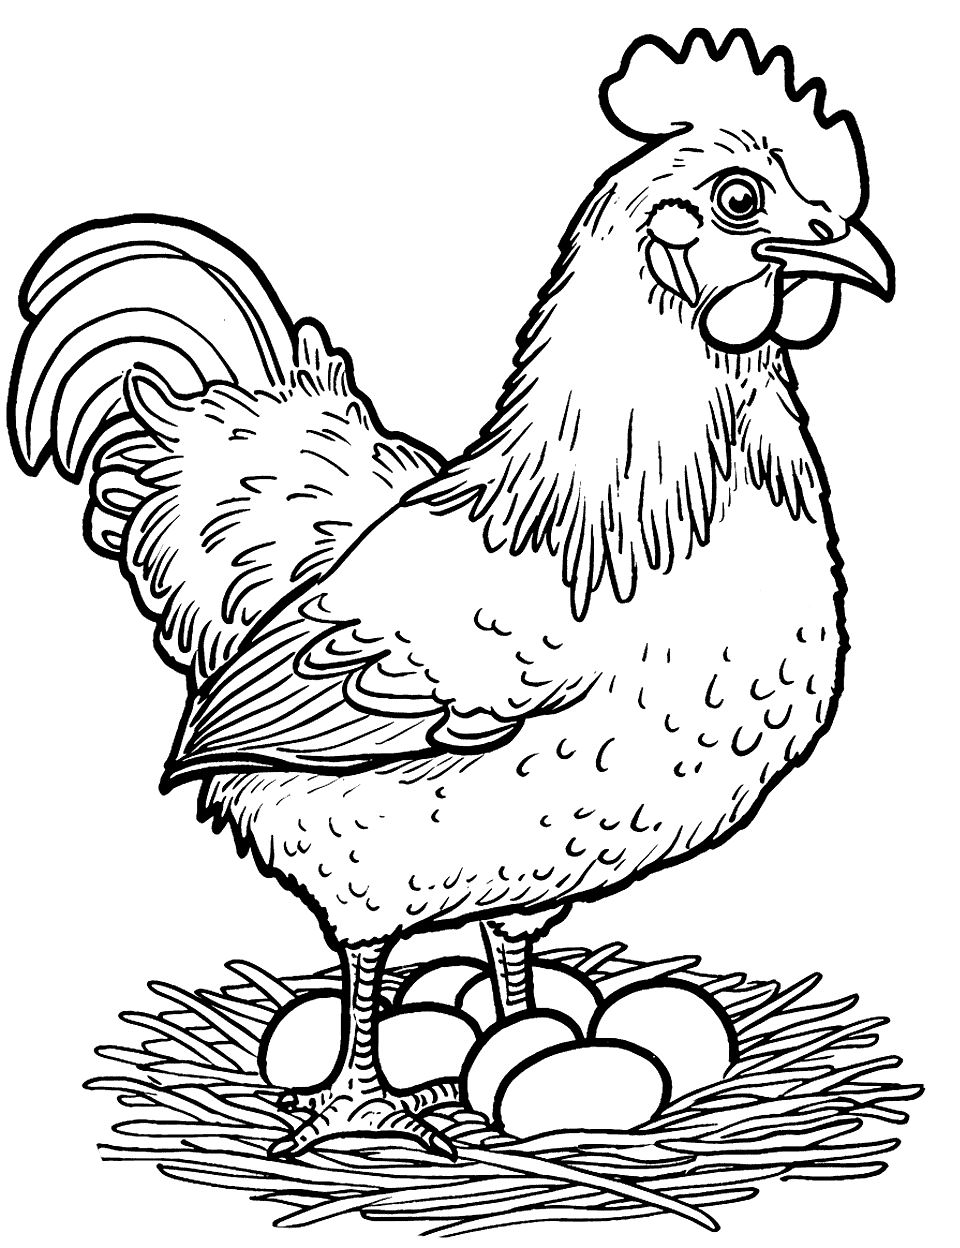 Hen Watching Over Eggs Chicken Coloring Page - A vigilant hen standing over a nest filled with eggs, ready to hatch.